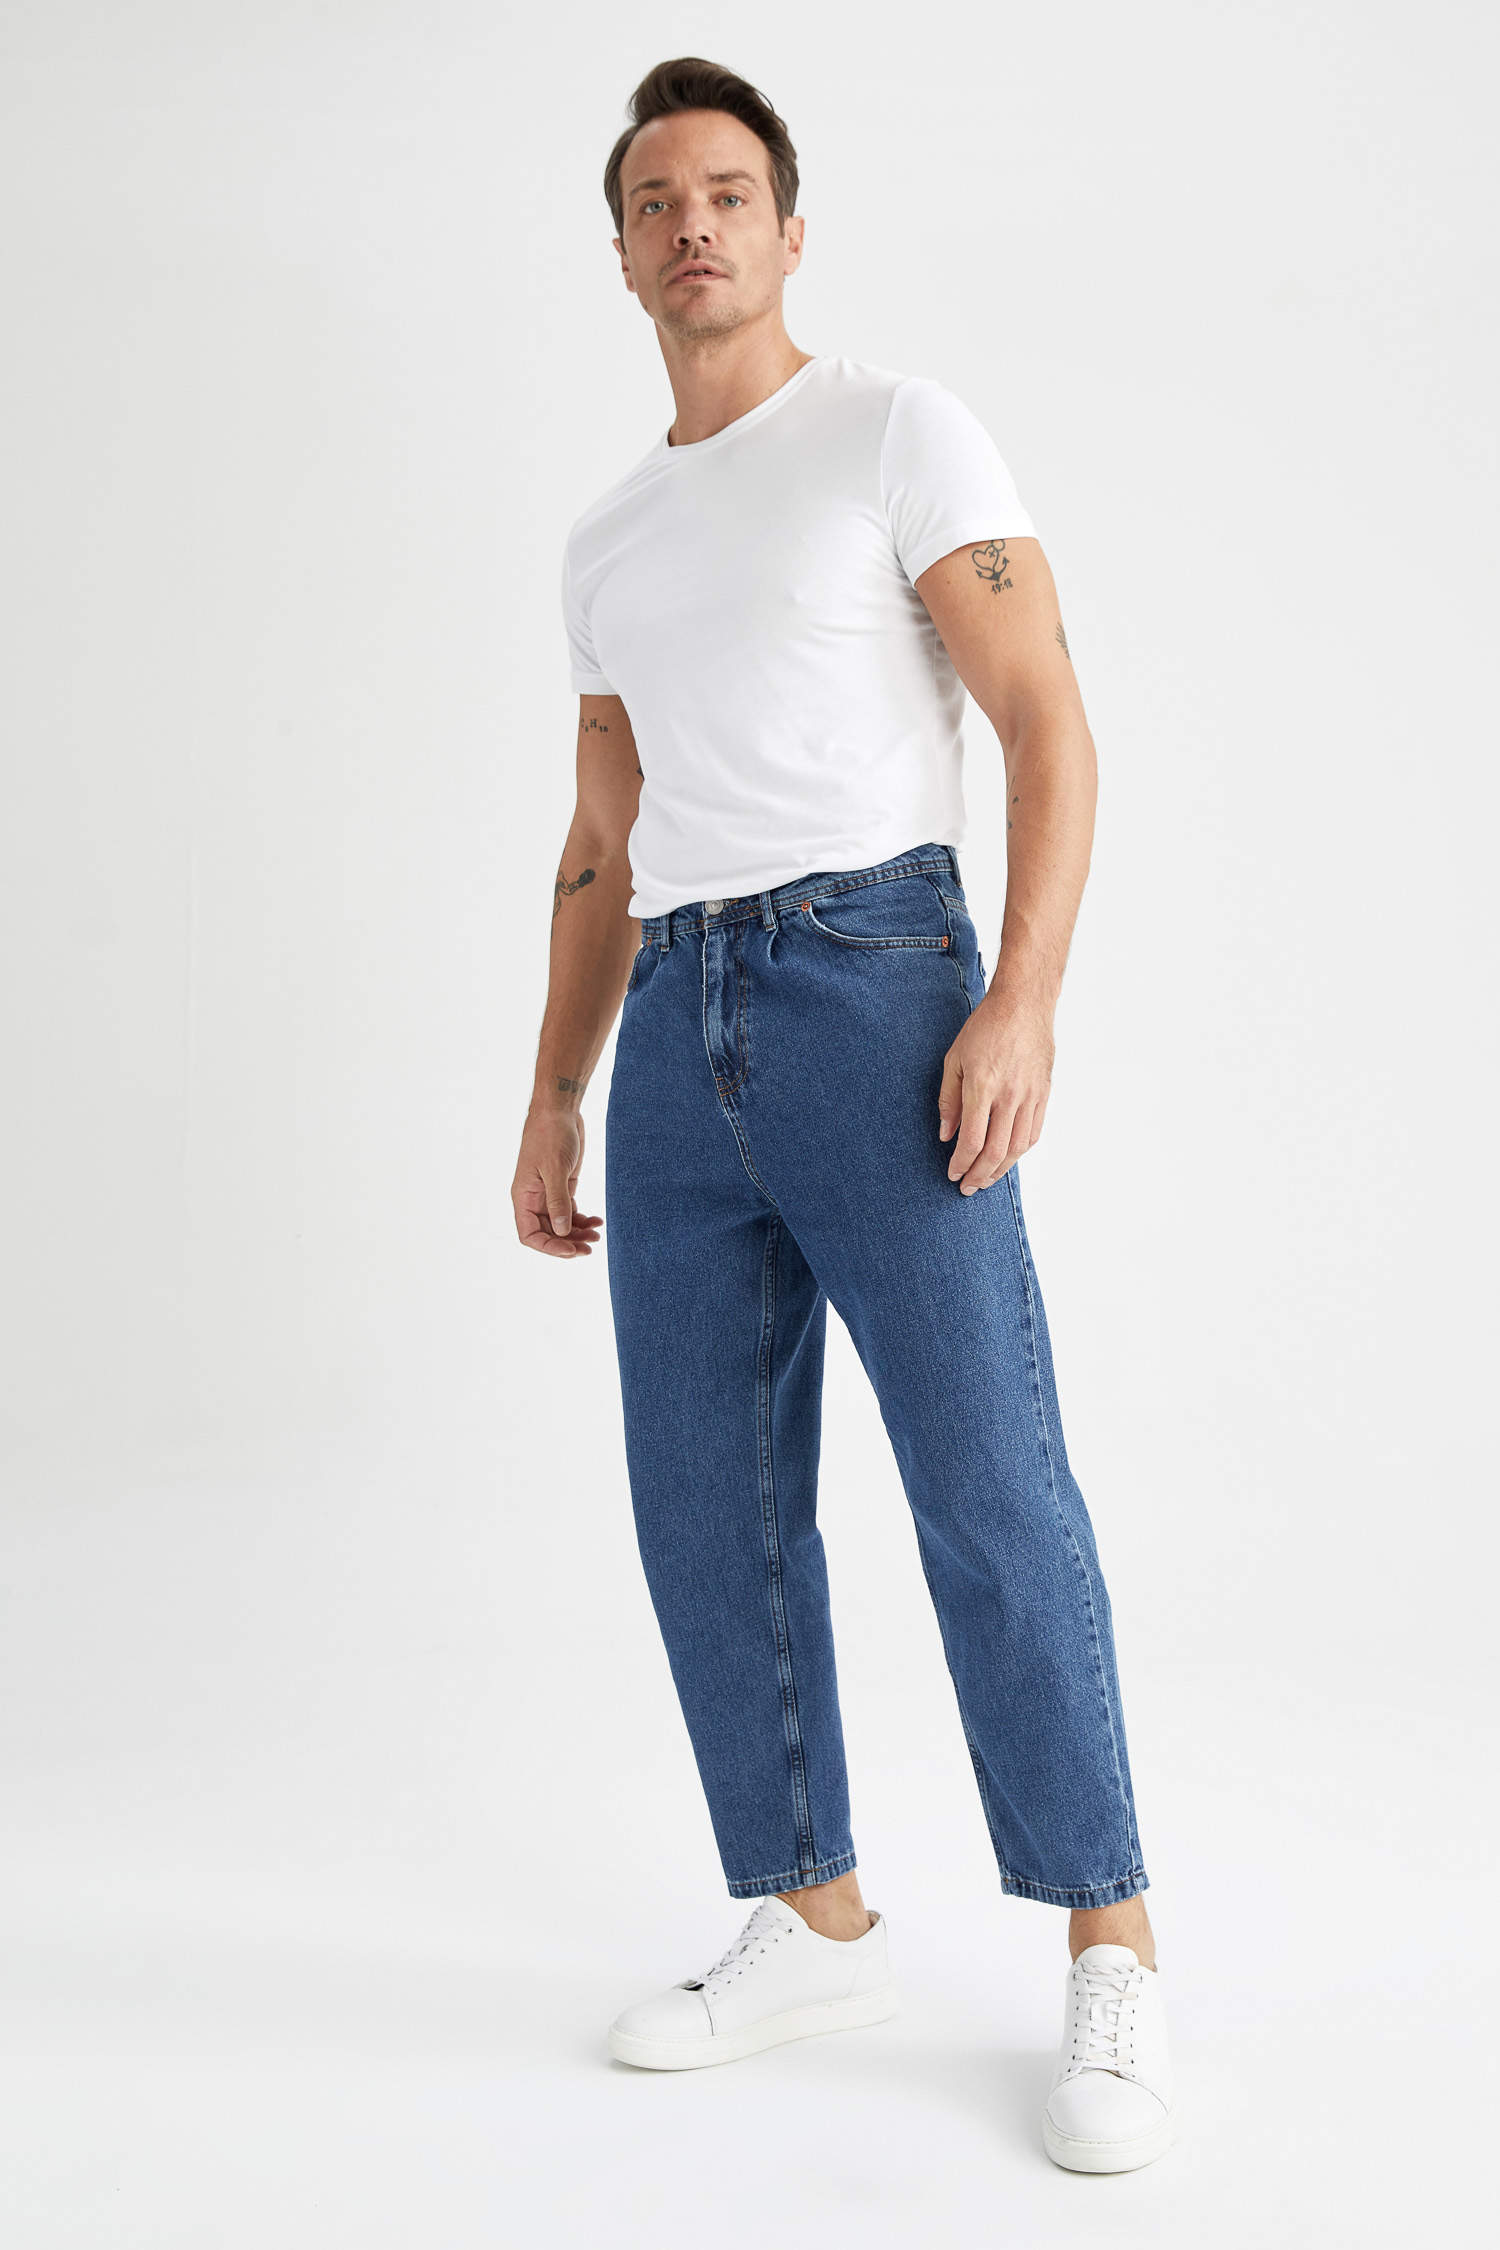 Balloon Fit Jeans with Pockets